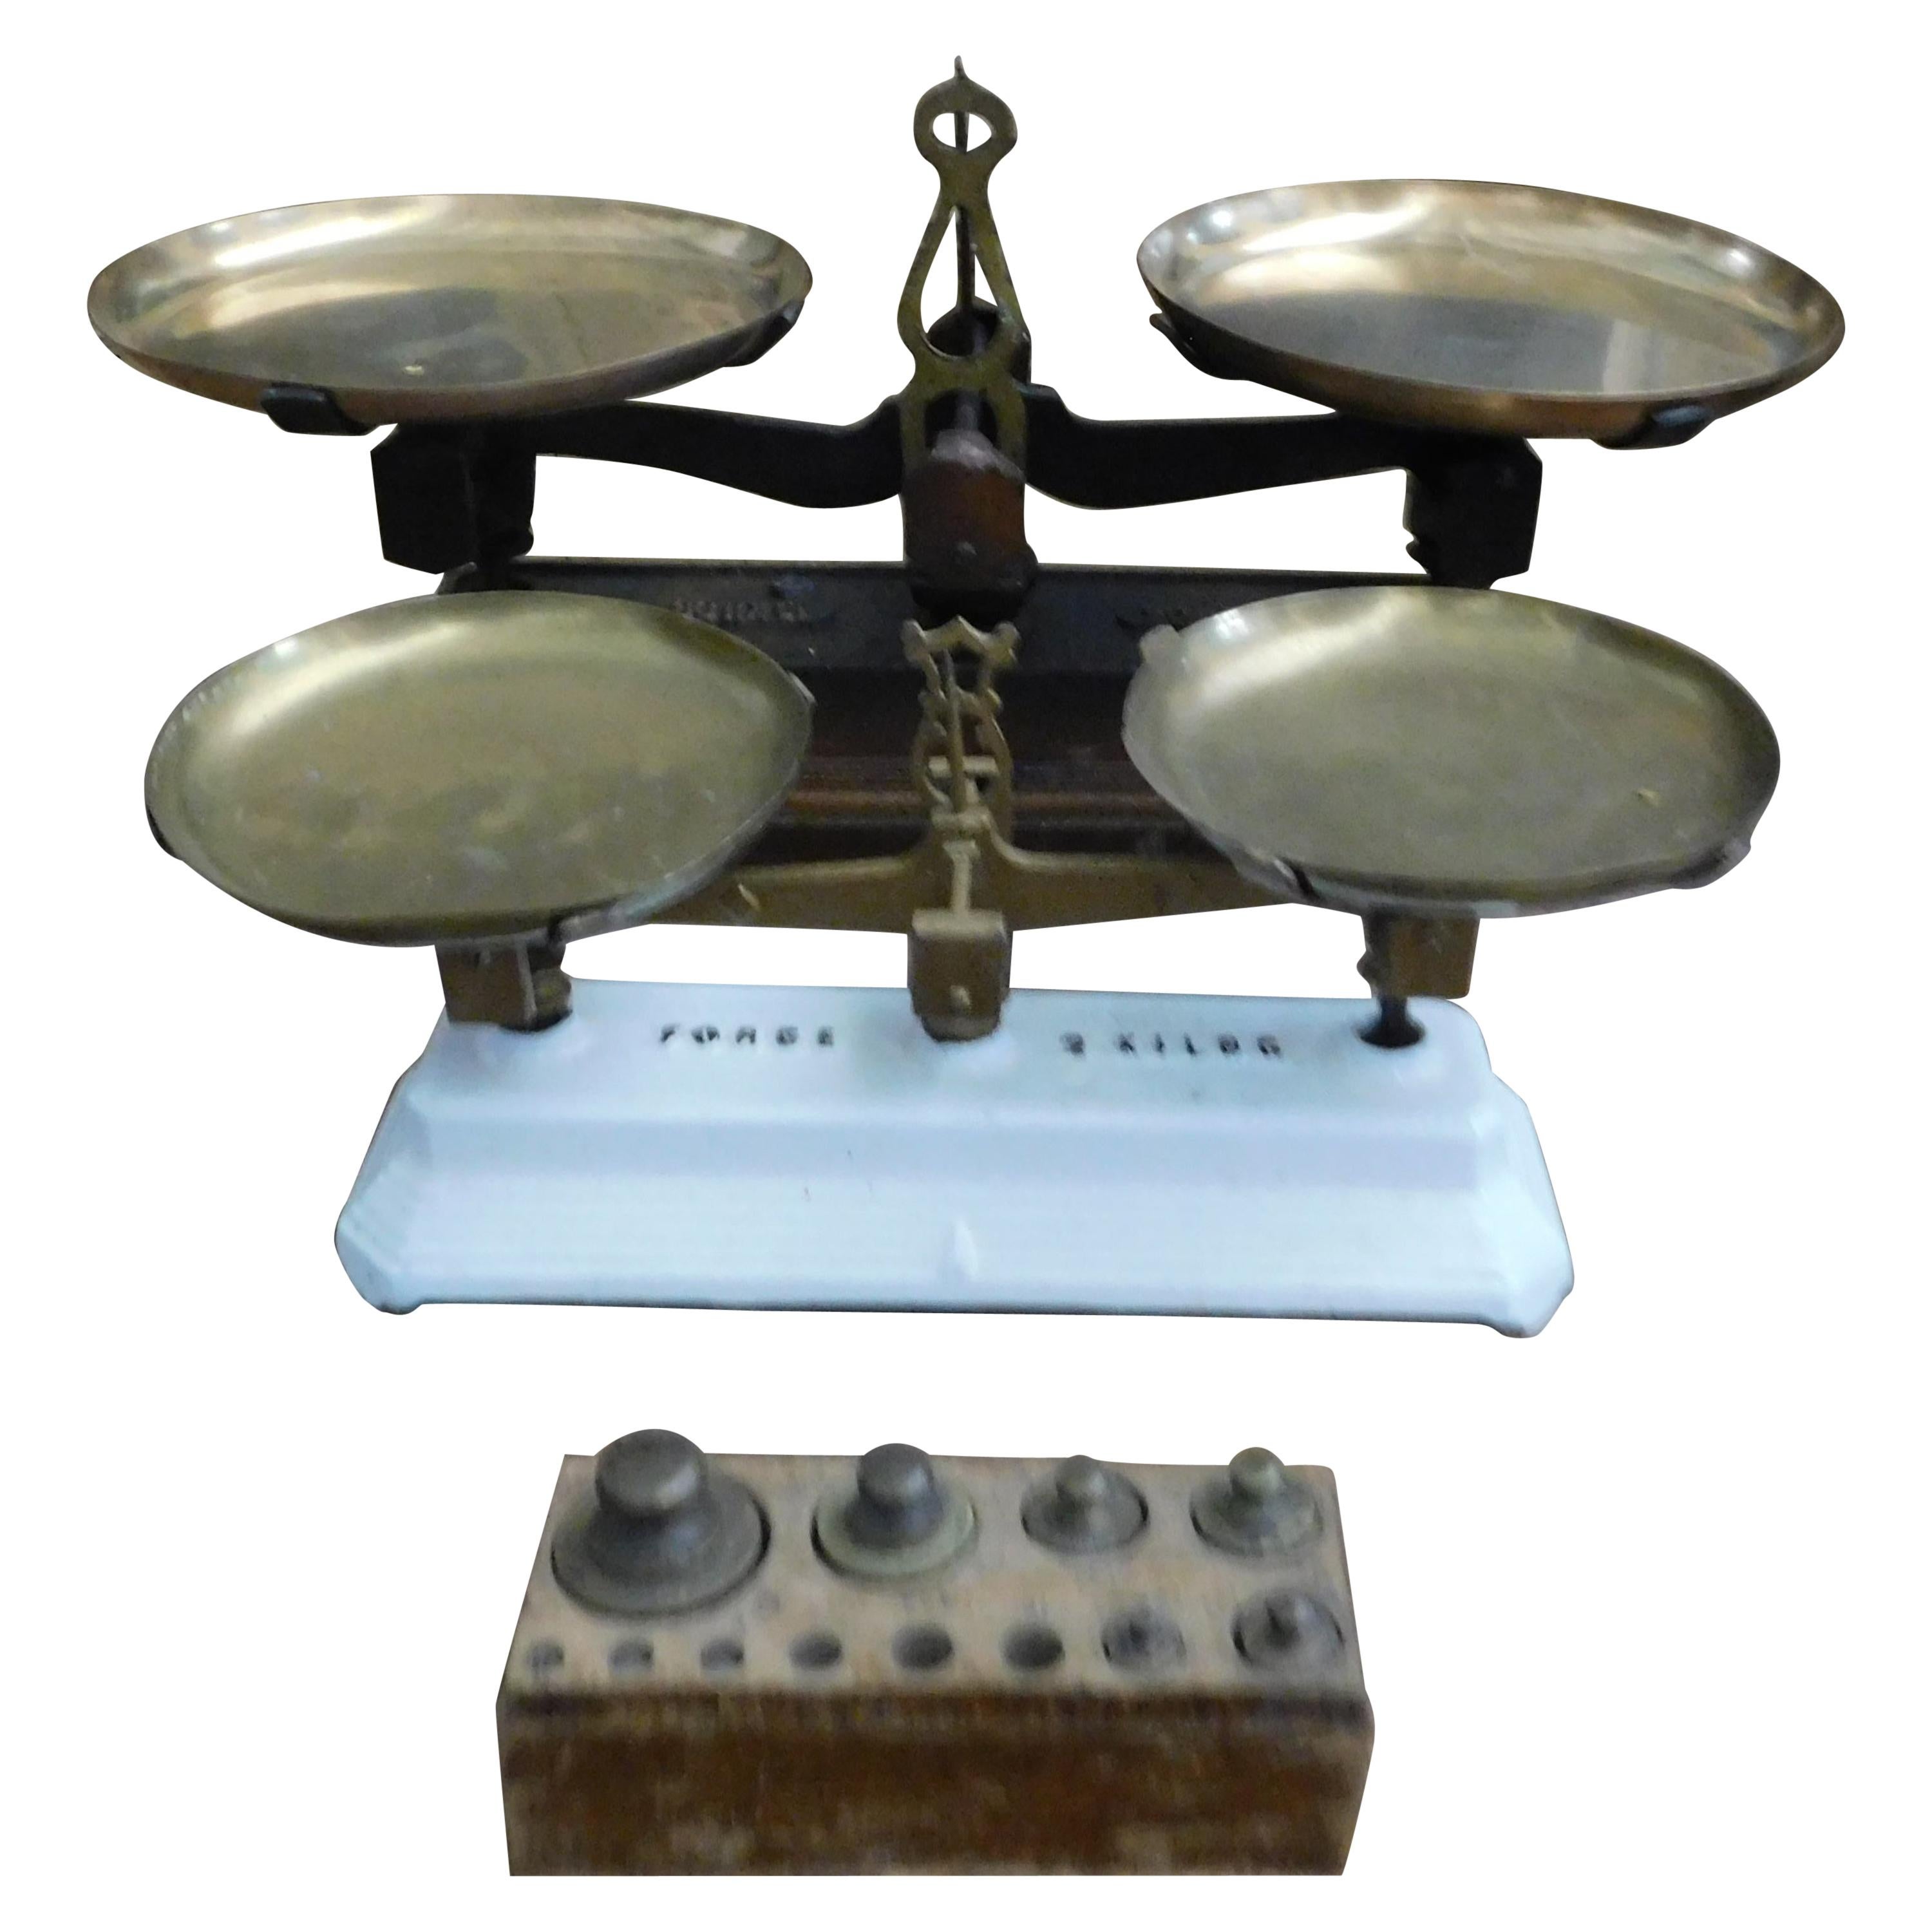 Antique Set 2 Brass Scale, Balance, with Weights, Ceramic and Bronze 1800 France